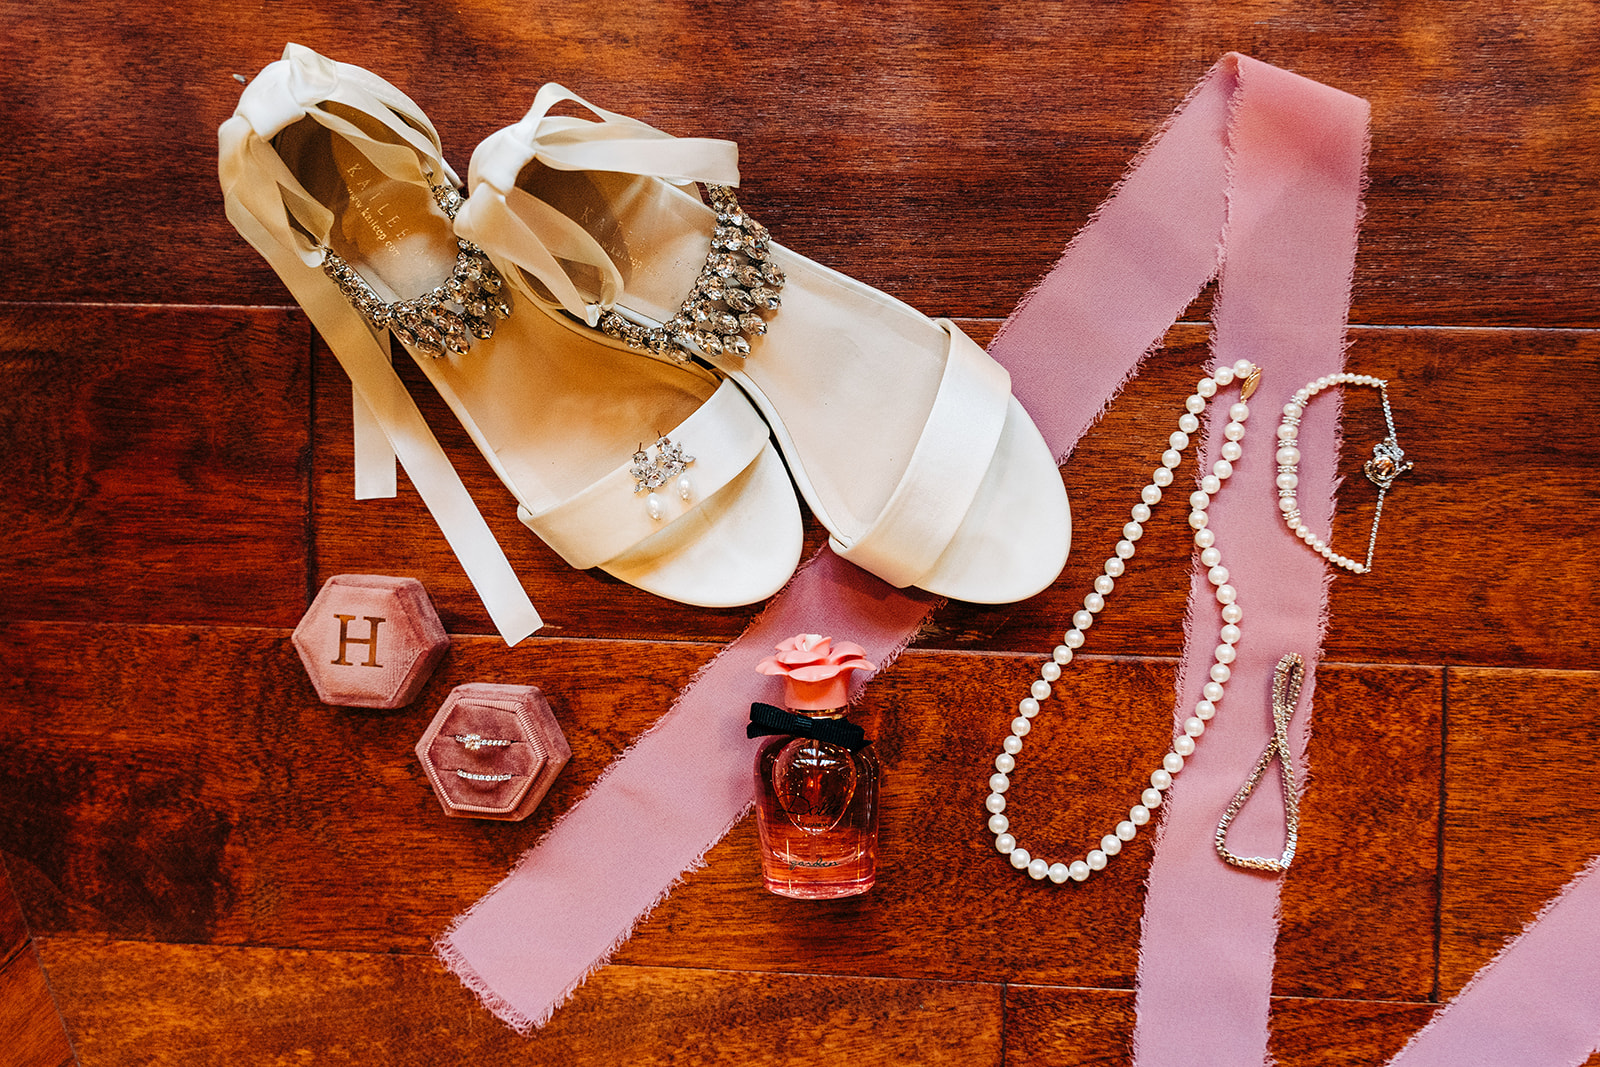 Detailed wedding day flatlay of wedding rings, shoes, perfume, jewelry and vow book.